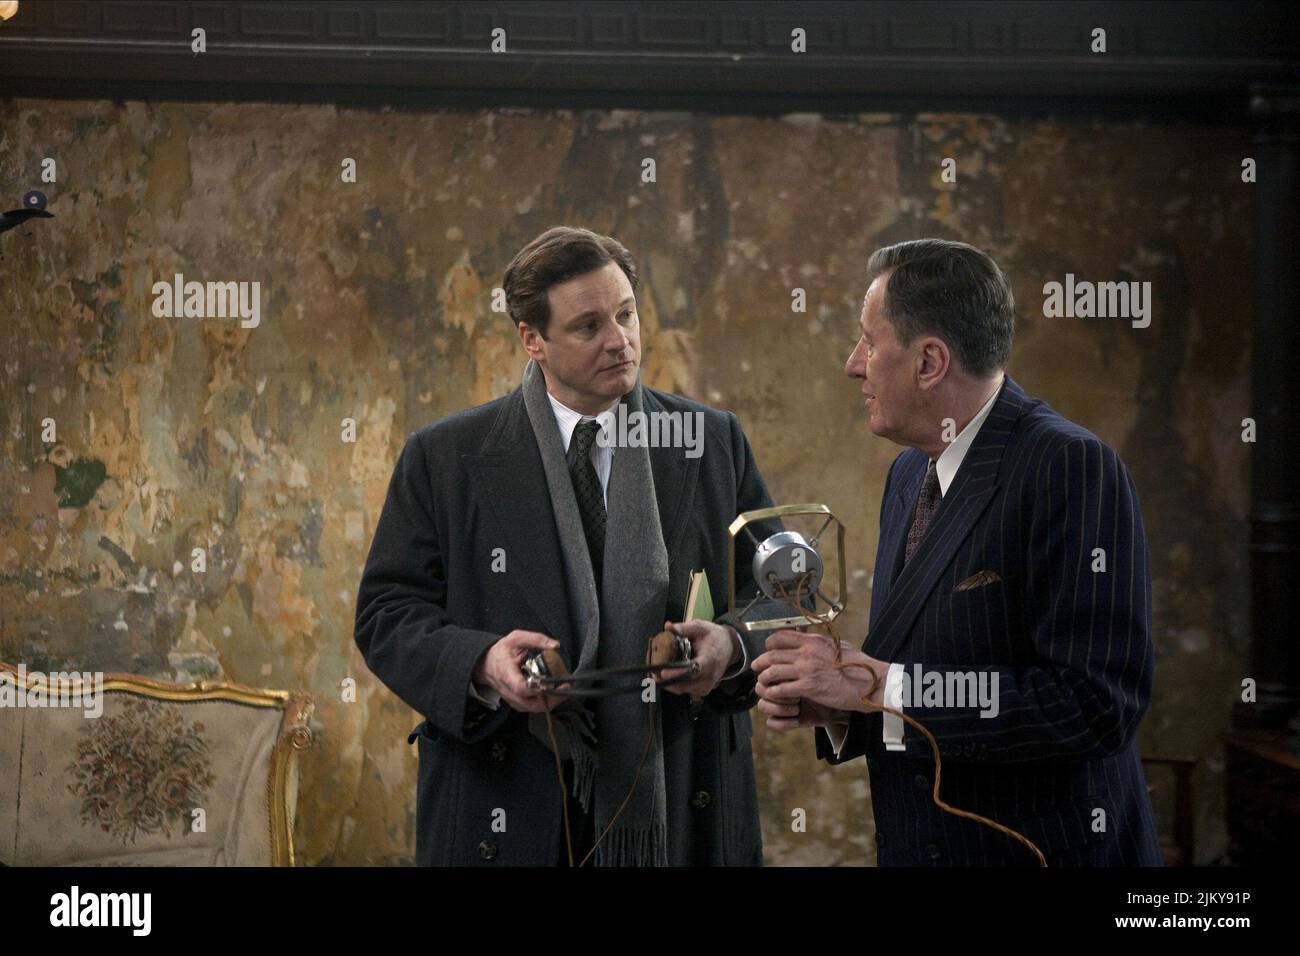 COLIN FIRTH, GEOFFREY RUSH, THE KING'S SPEECH, 2010 Stock Photo